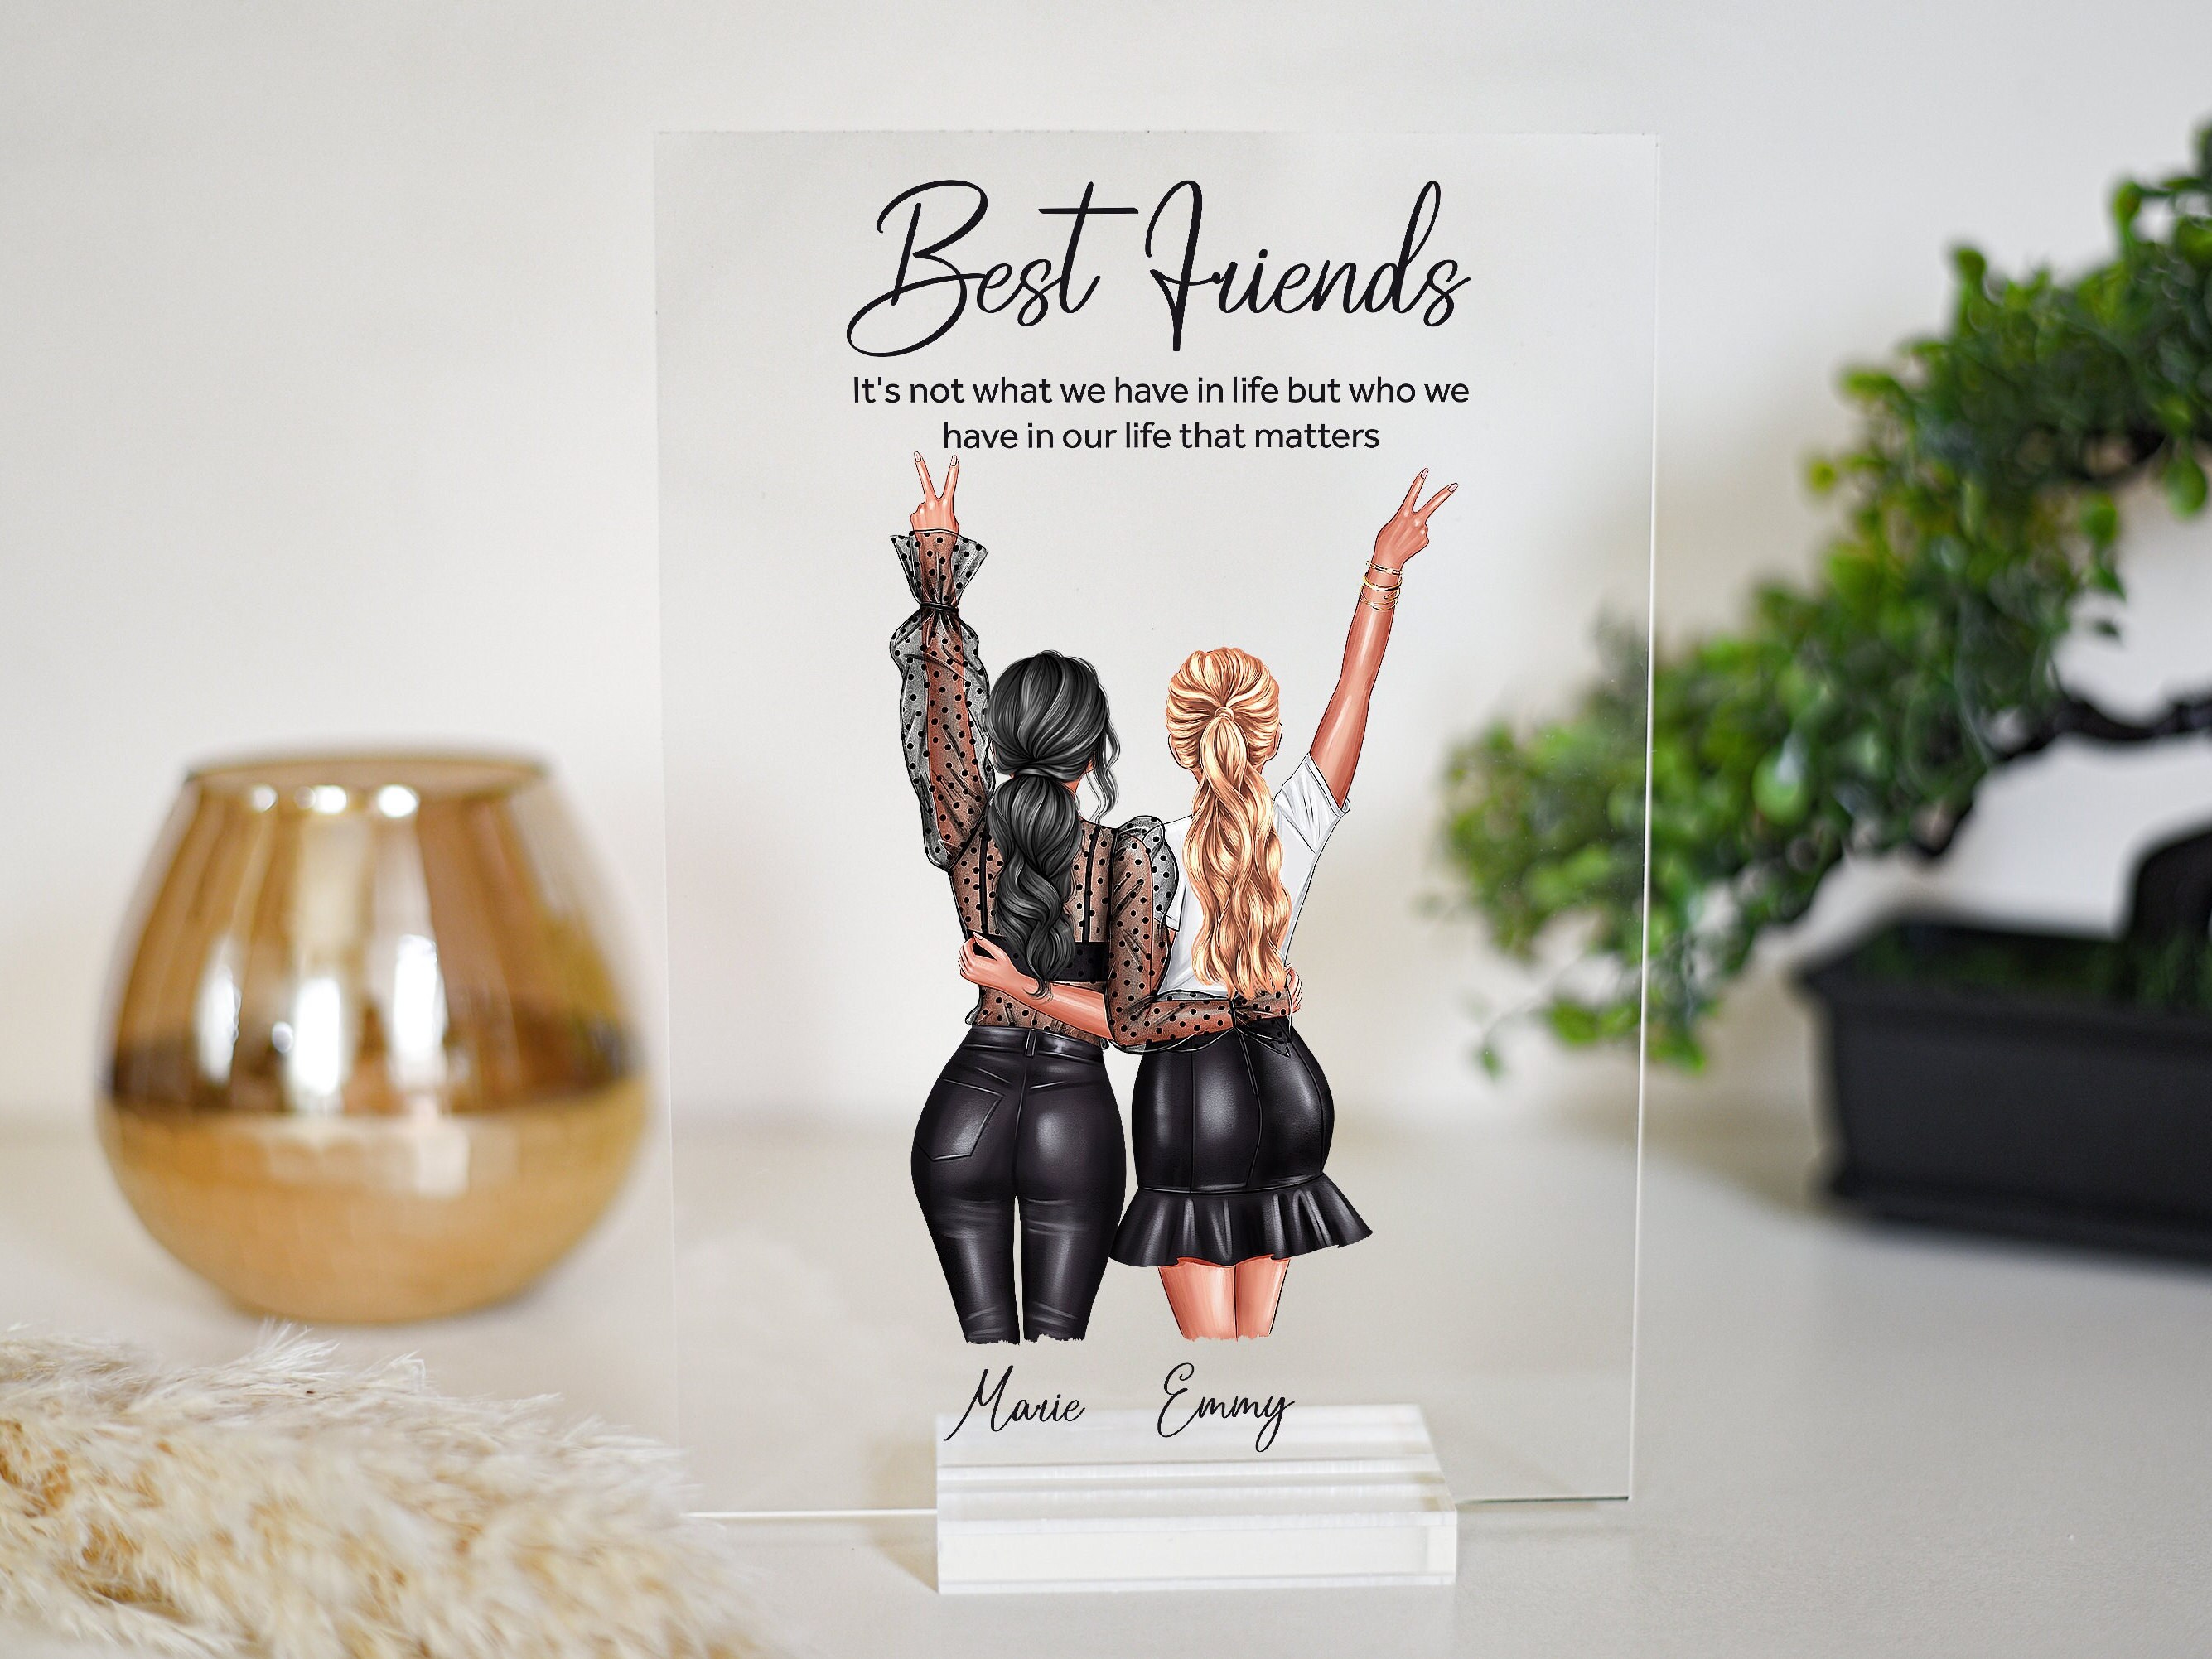 35 Birthday Gifts for Your Best Friend  Gifts Ideas for Female Best F –  Shadow Breeze